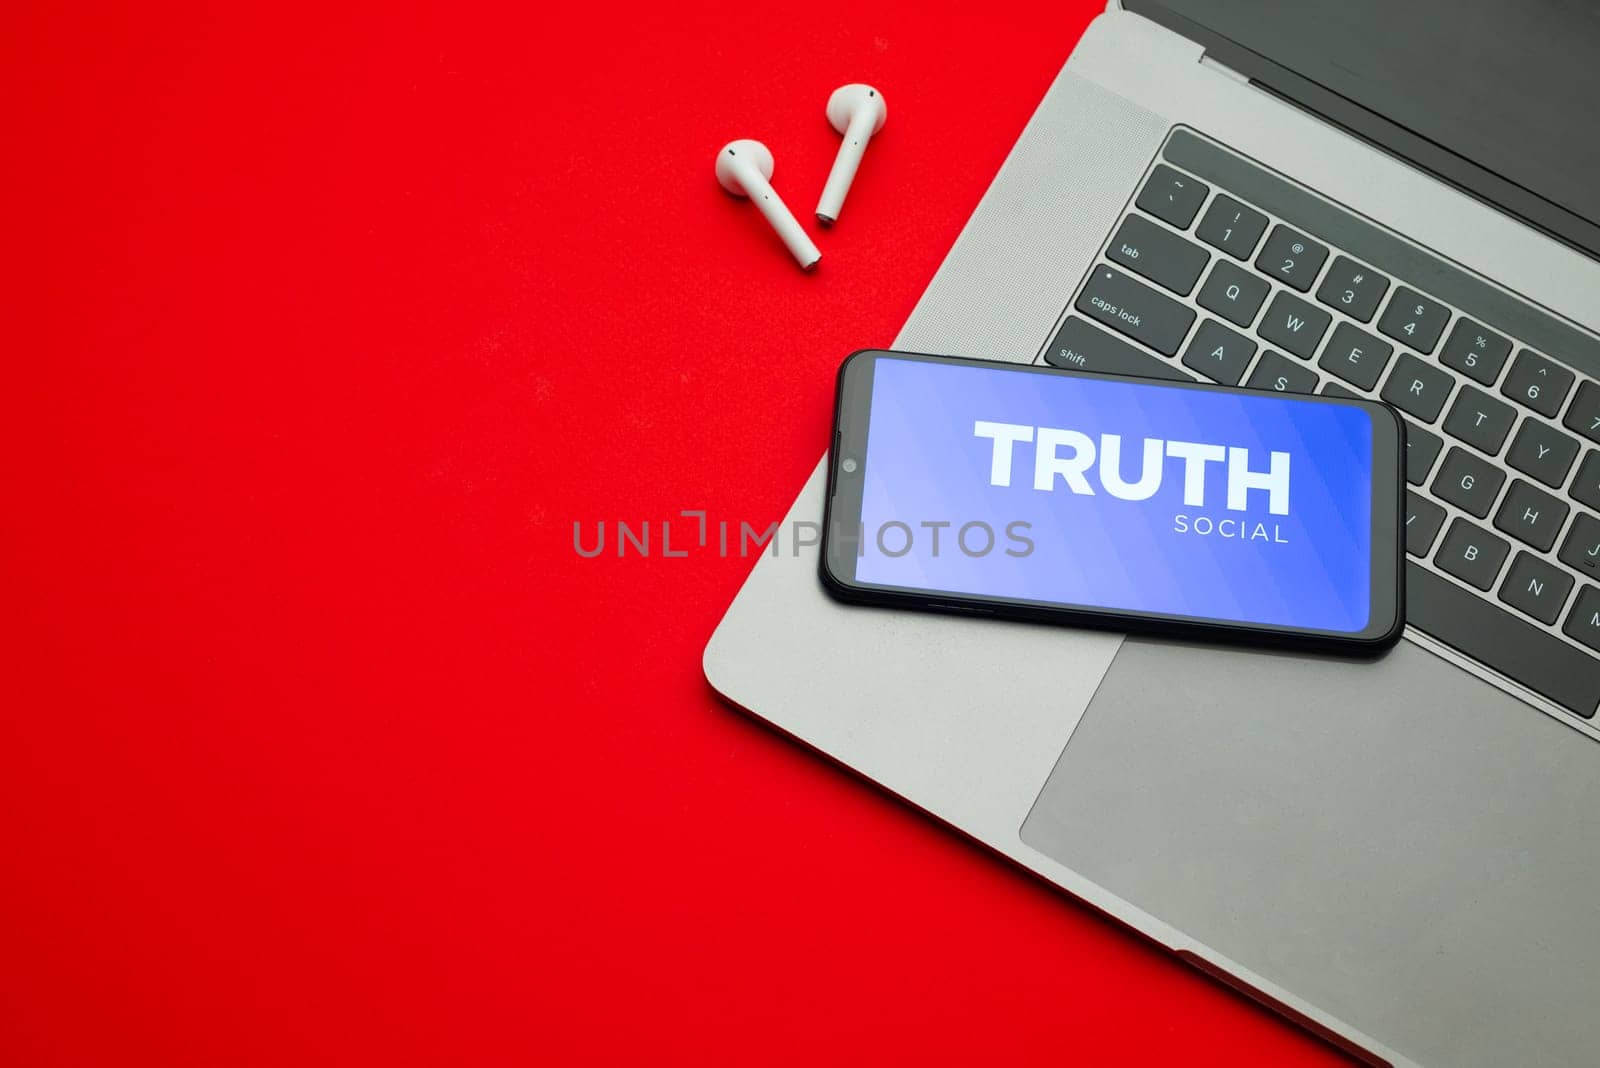 Tula, Russia - Jan 10, 2022: Truth Social app logo on smartphone screen on red background. New social media platform from Donald Trump. by zartarn